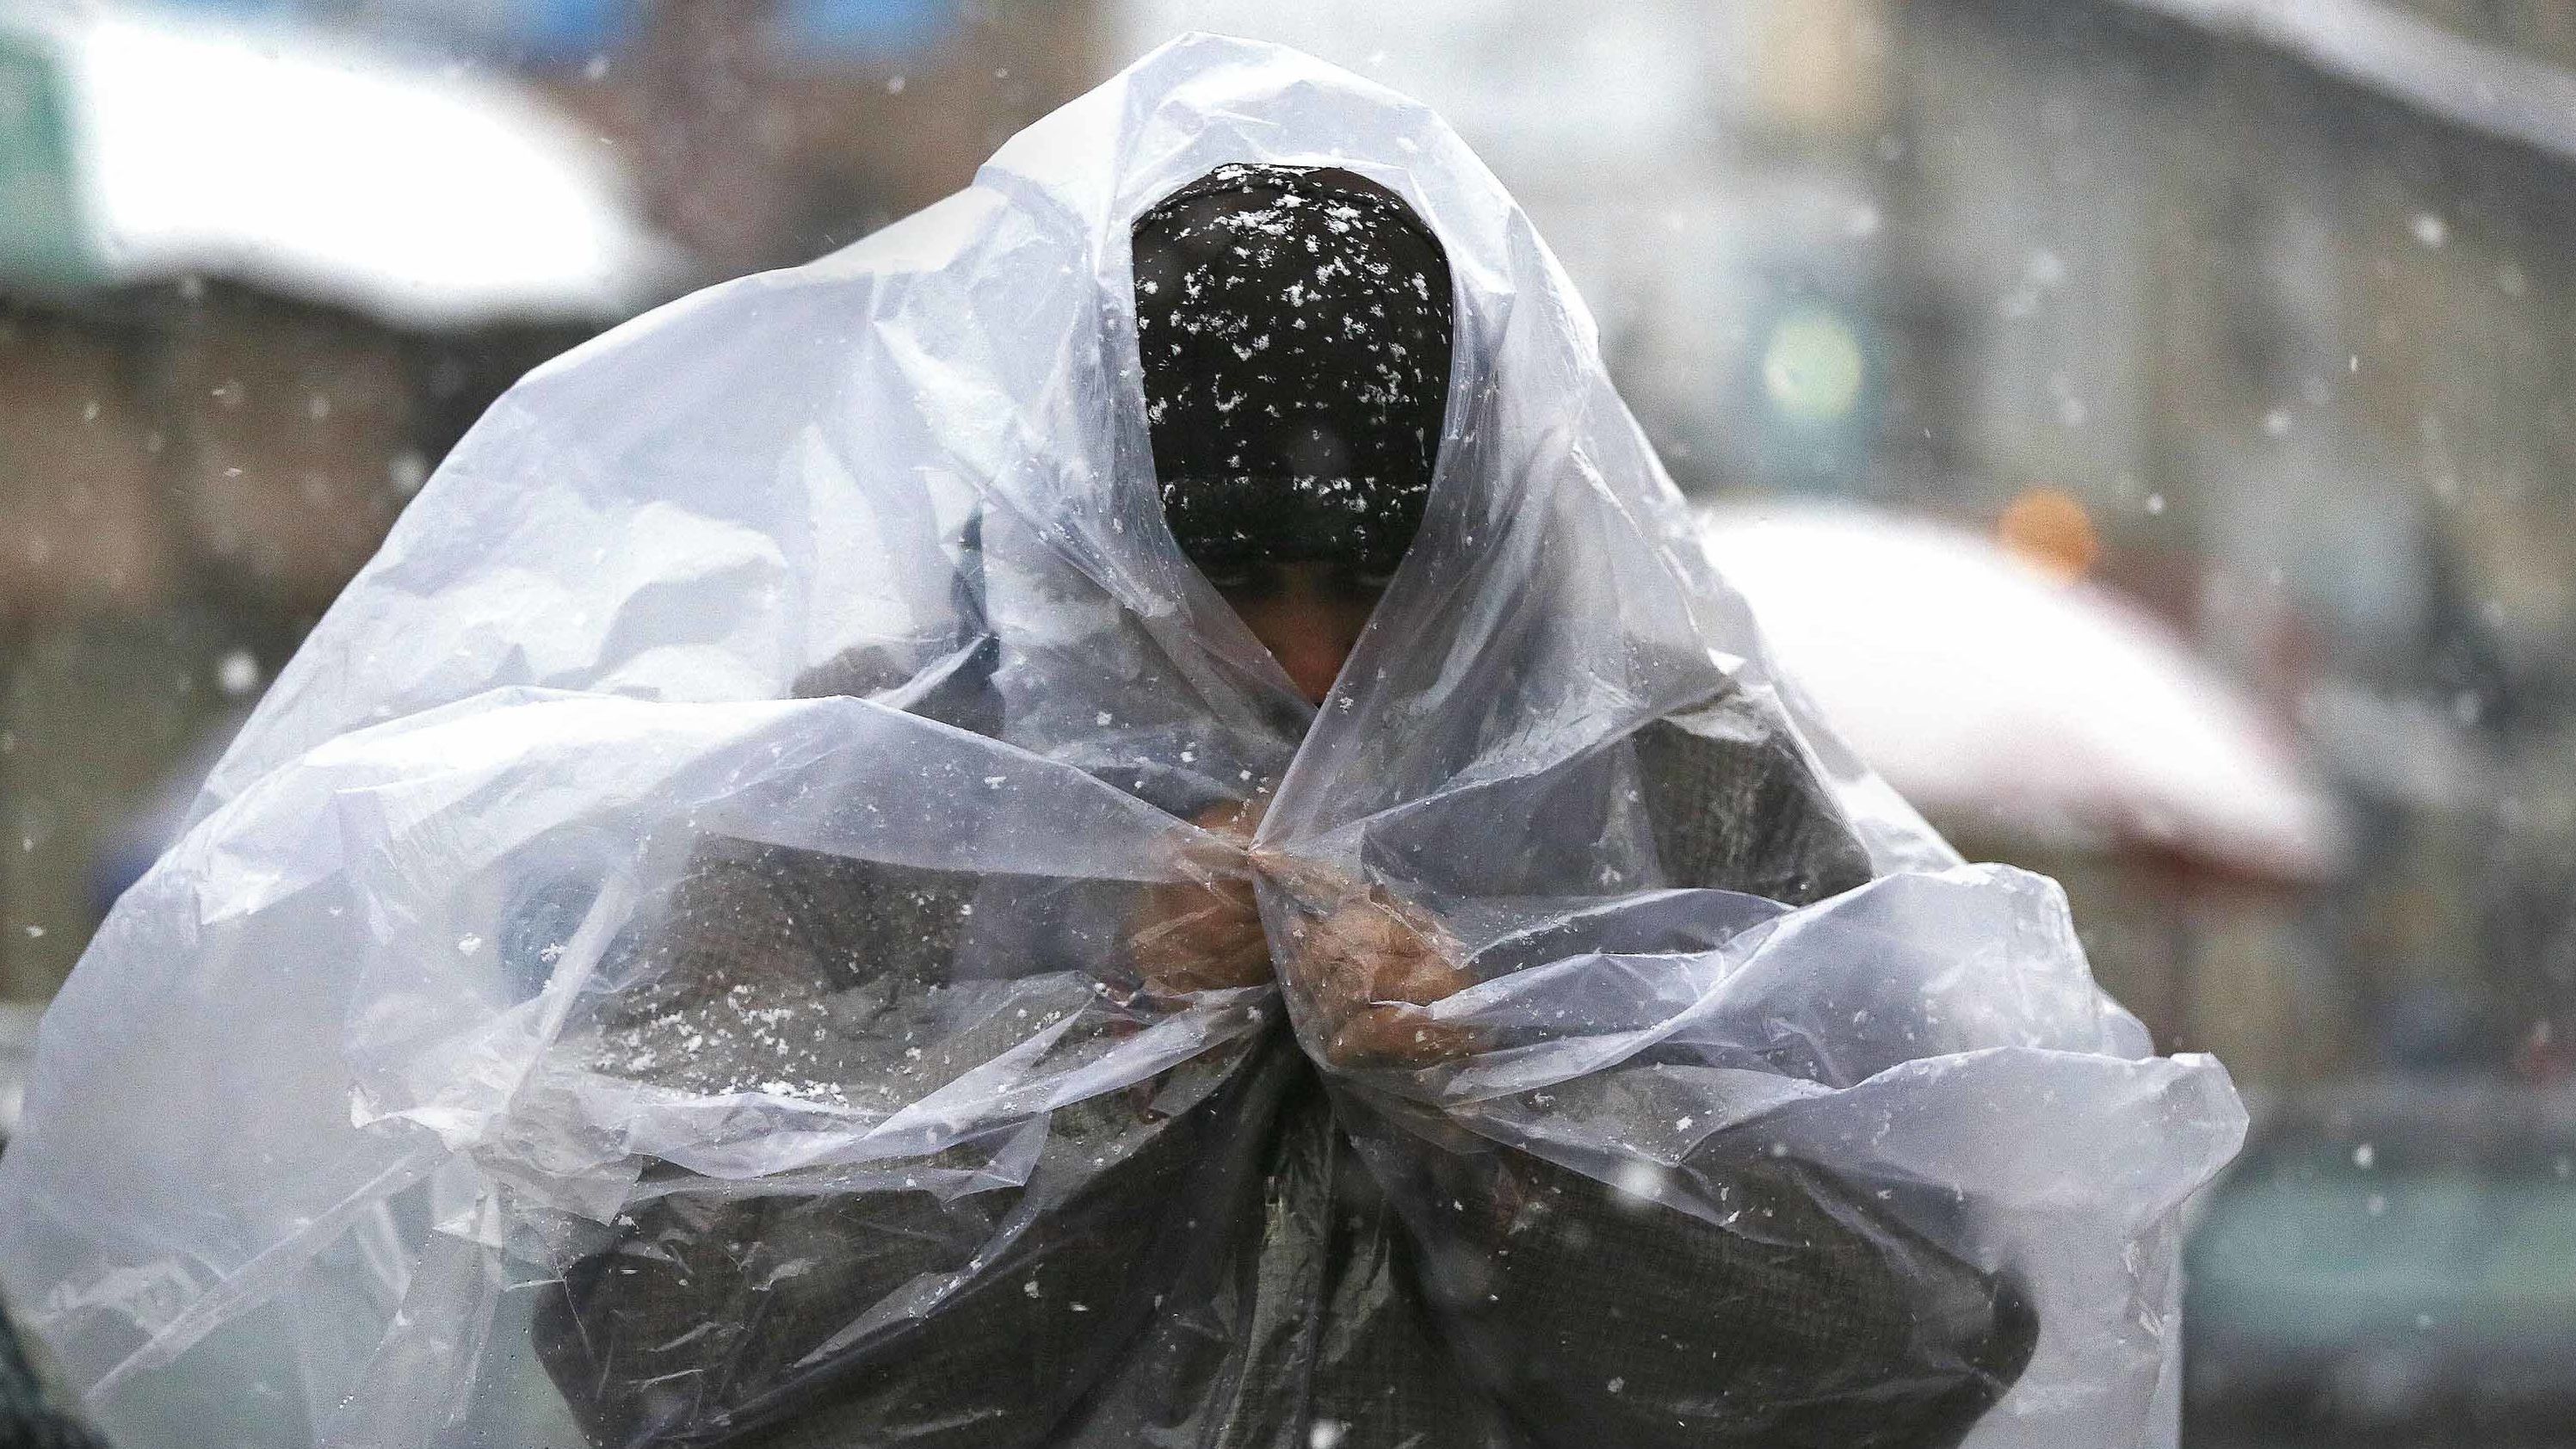 A man covers himself with a plastic sheet during snowfall in Srinagar in Indian-controlled Kashmir on Thursday, January 31. 